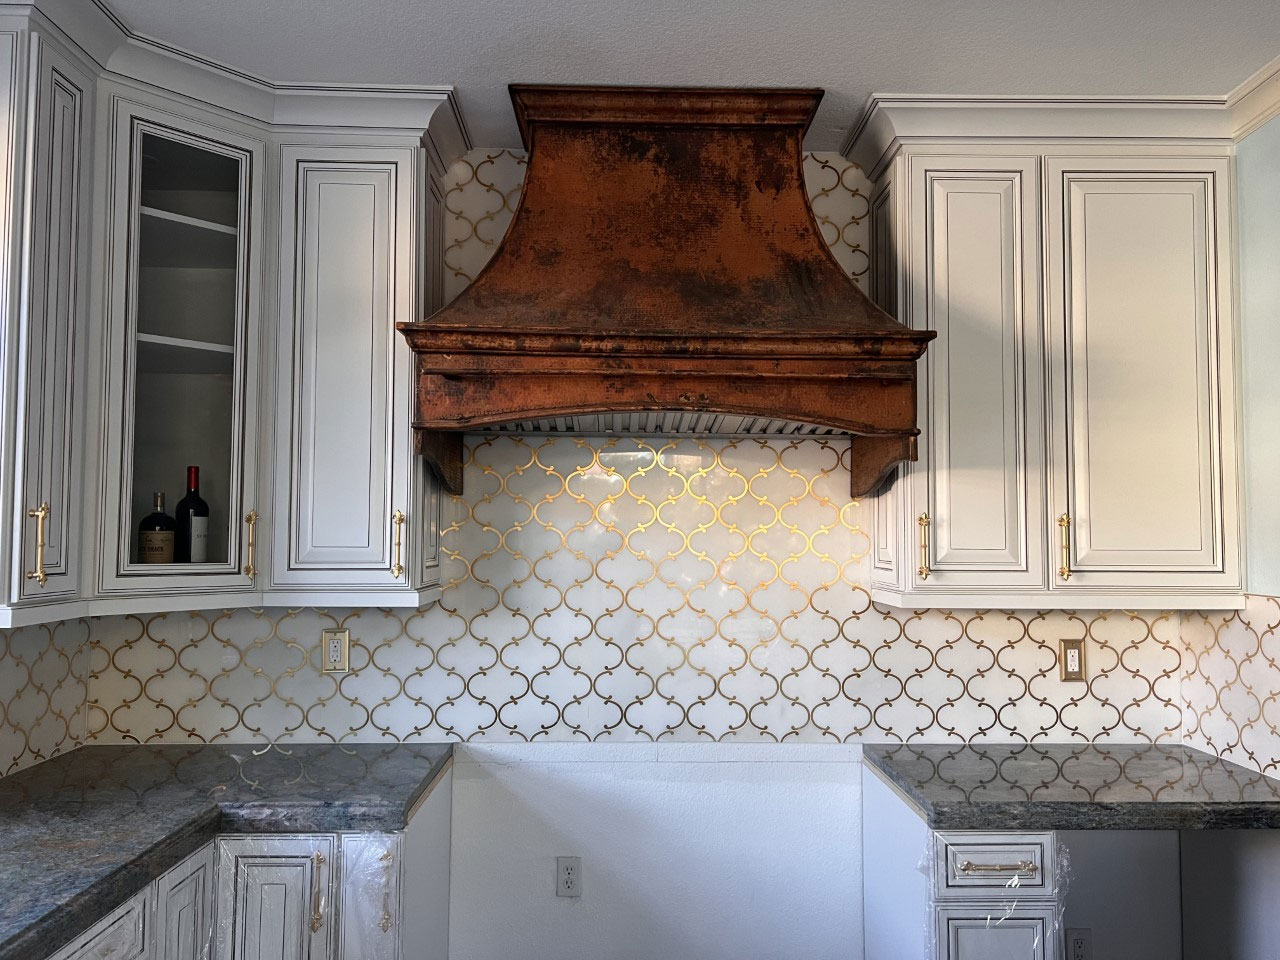 Stylish range hood complemented with a classic kitchen design with white cabinets, marble countertops, stunning marble backsplash